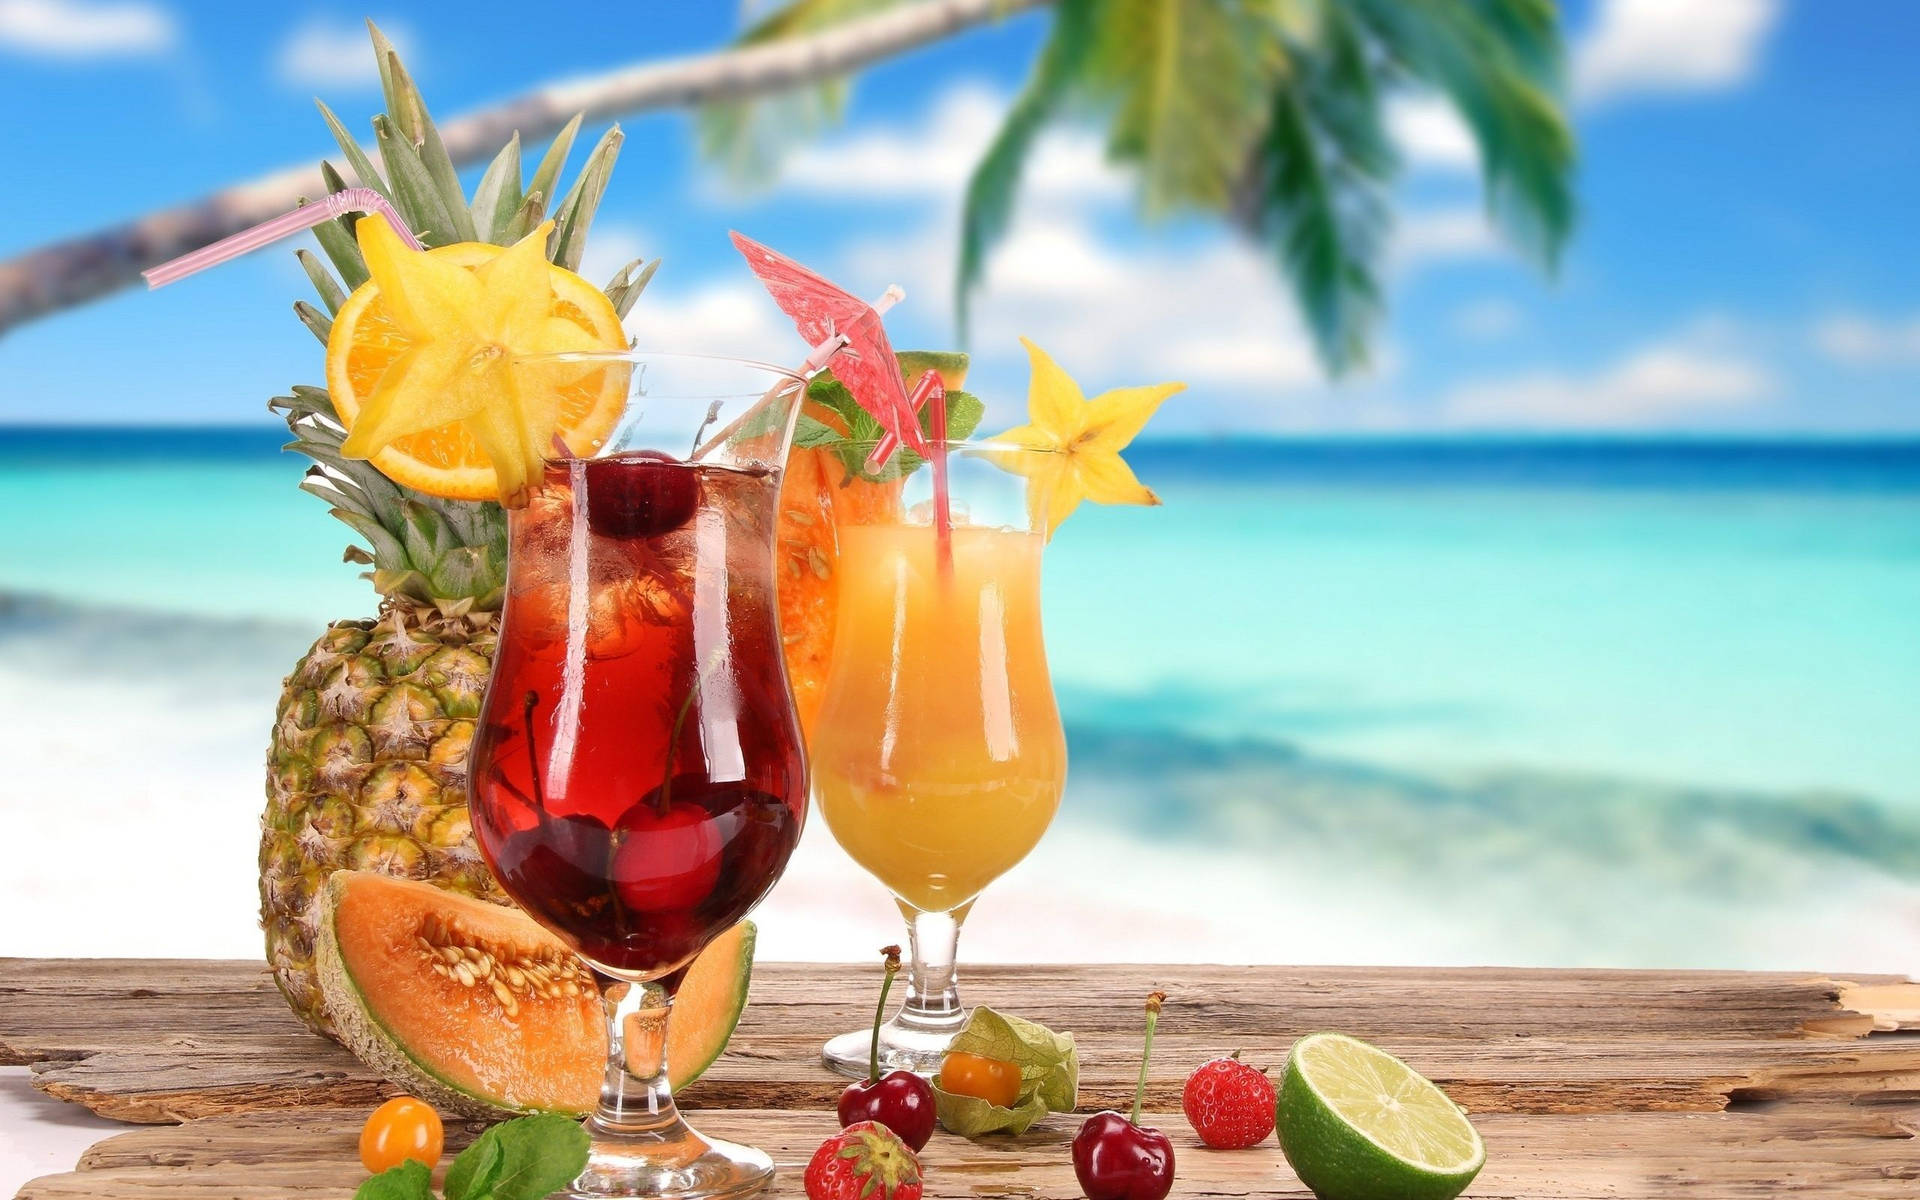 Tropical Drinks At The Beach Background